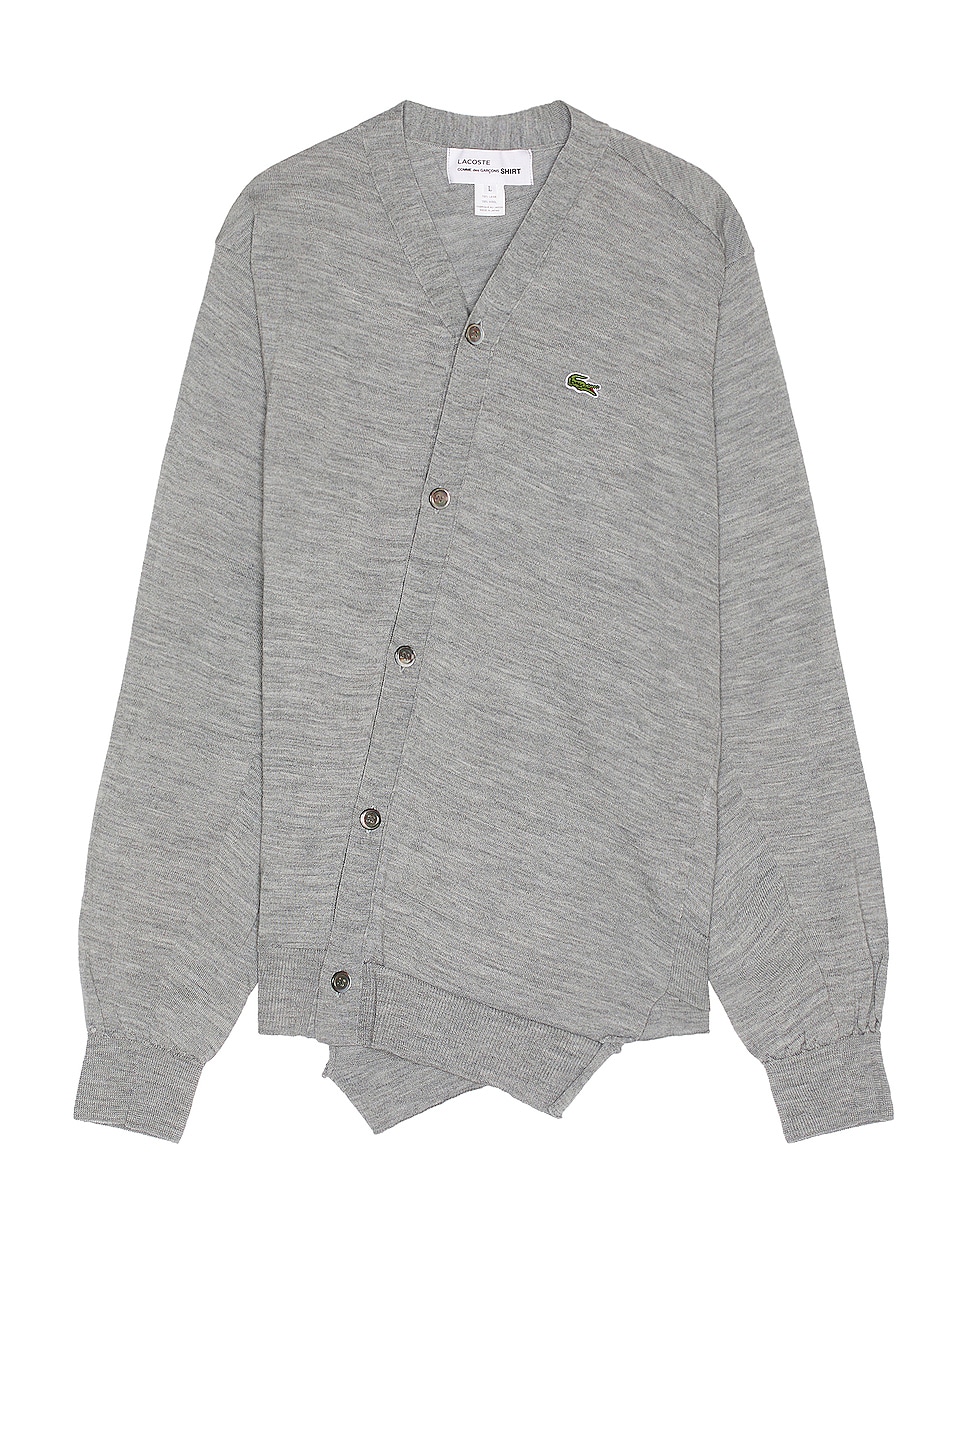 Image 1 of COMME des GARCONS SHIRT X Lacoste Cardigan in Grey